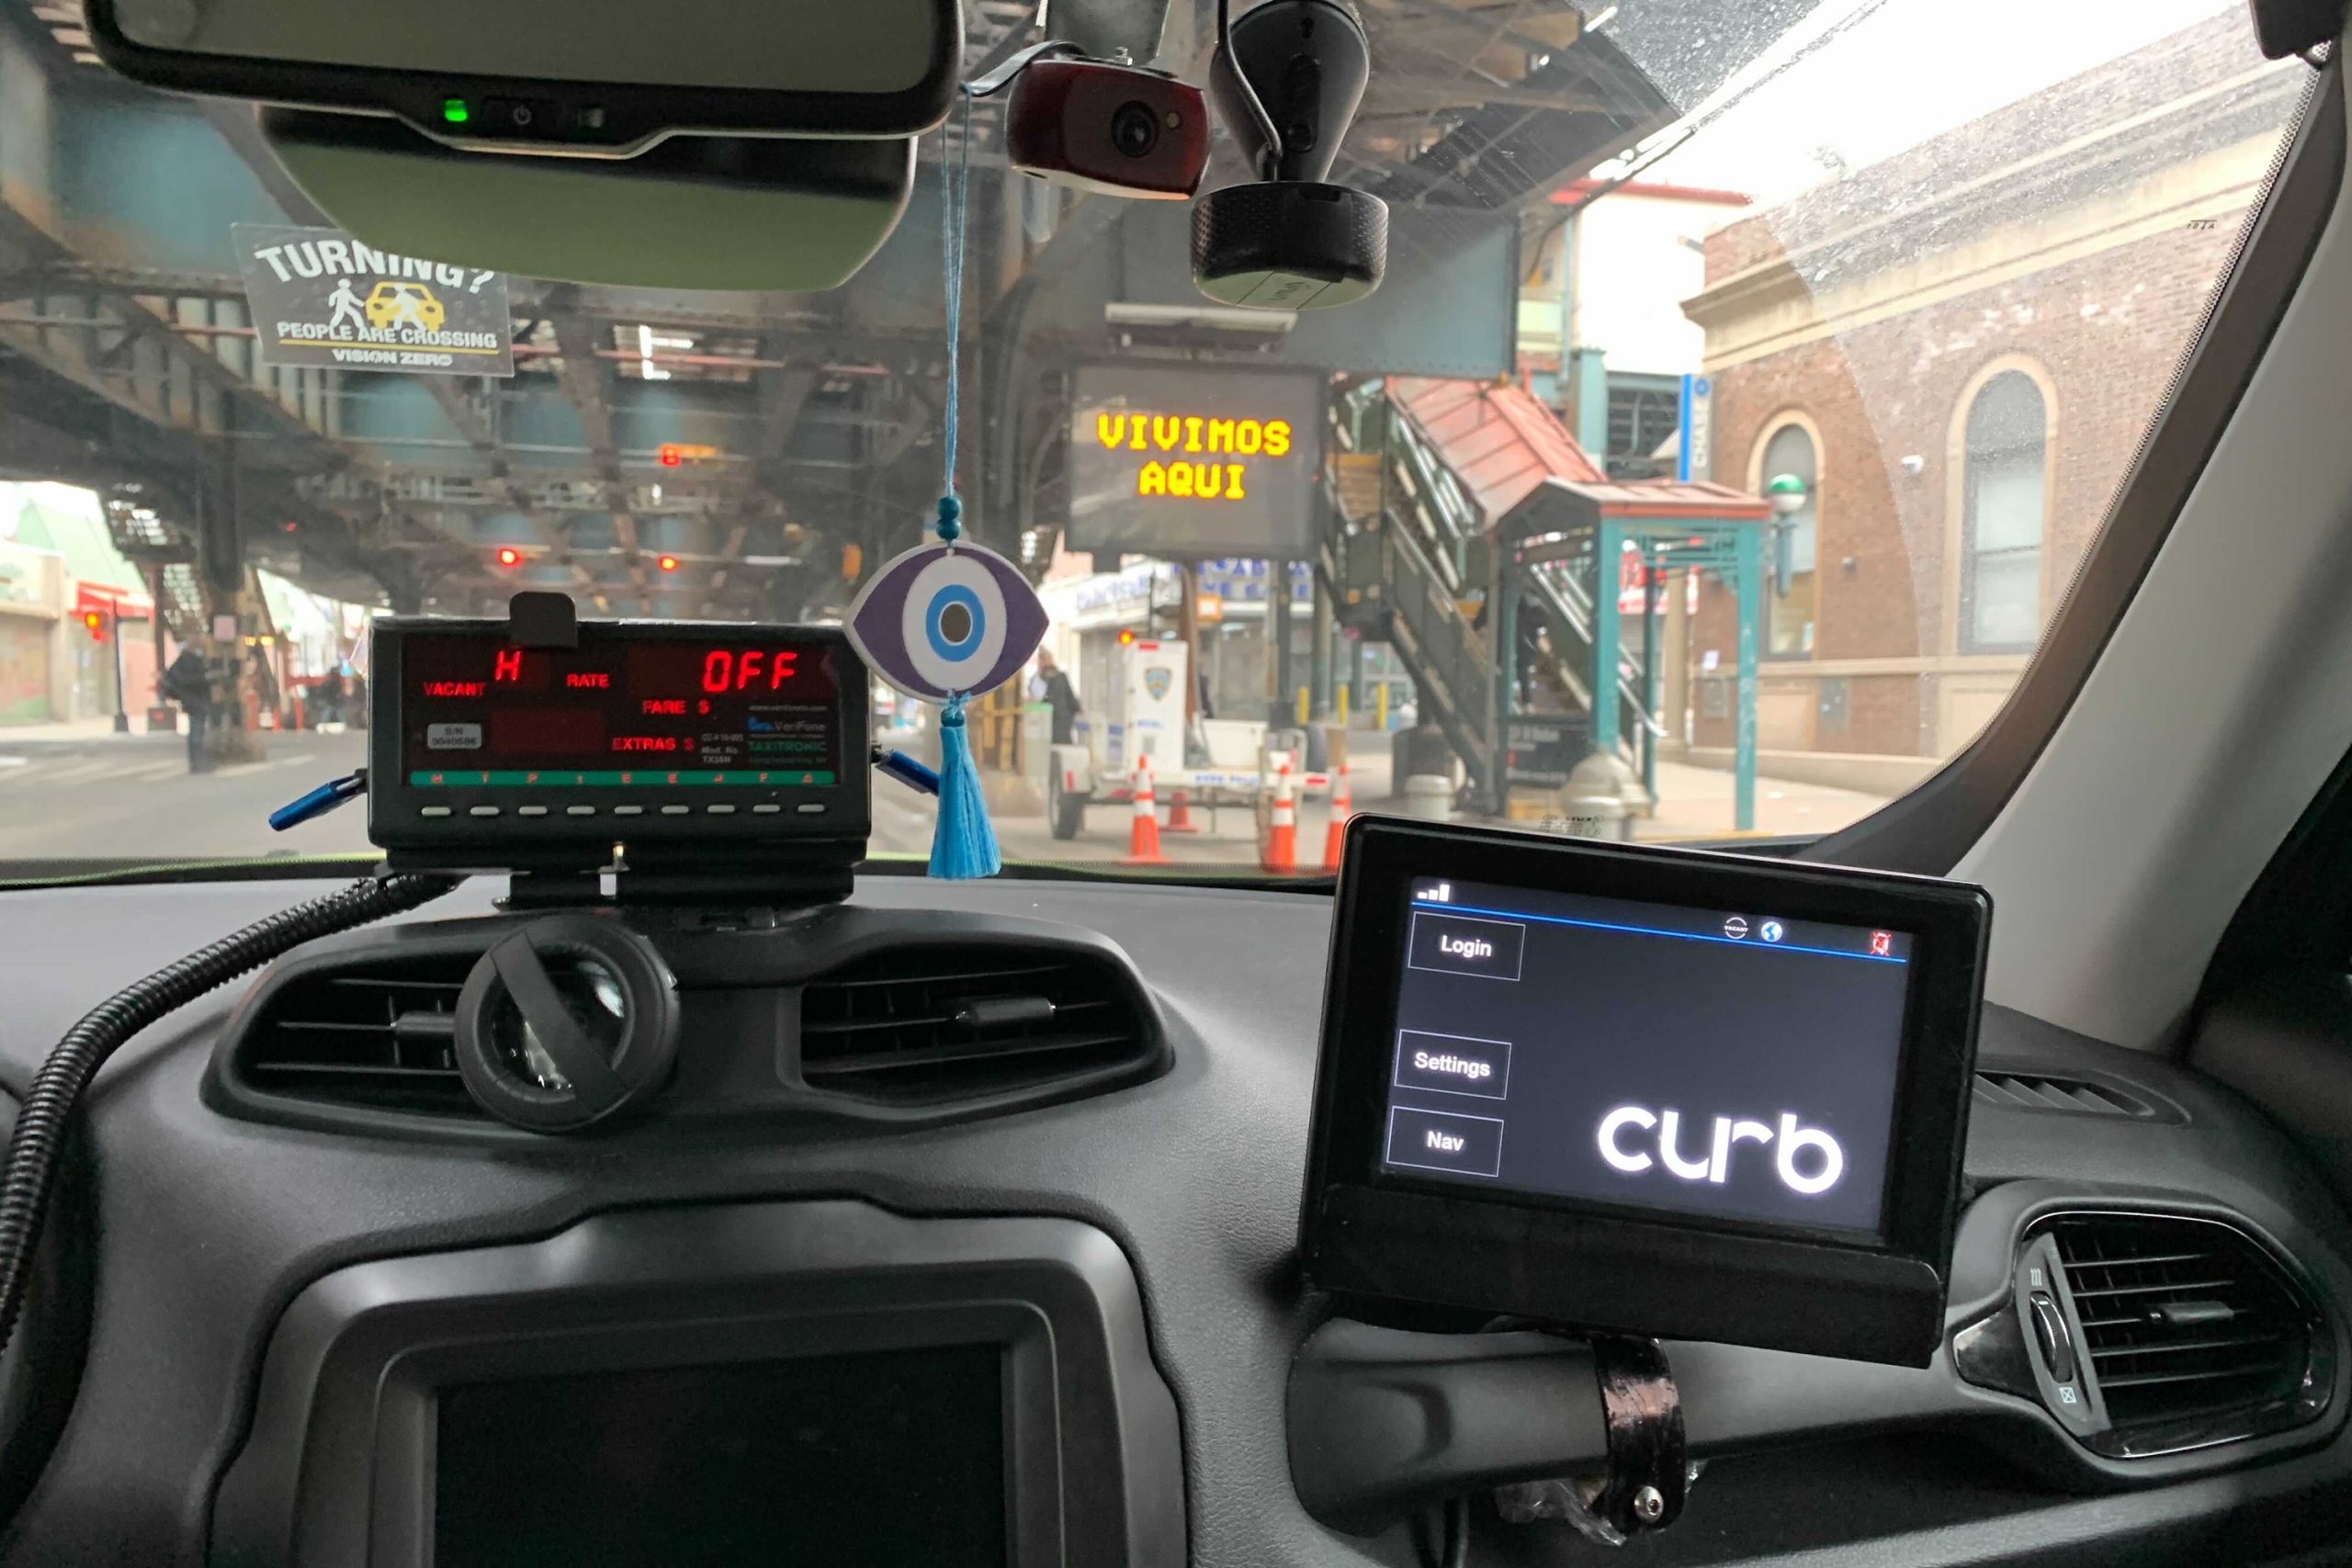 Inside a green cab on Broadway in The Bronx, March 1, 2022.